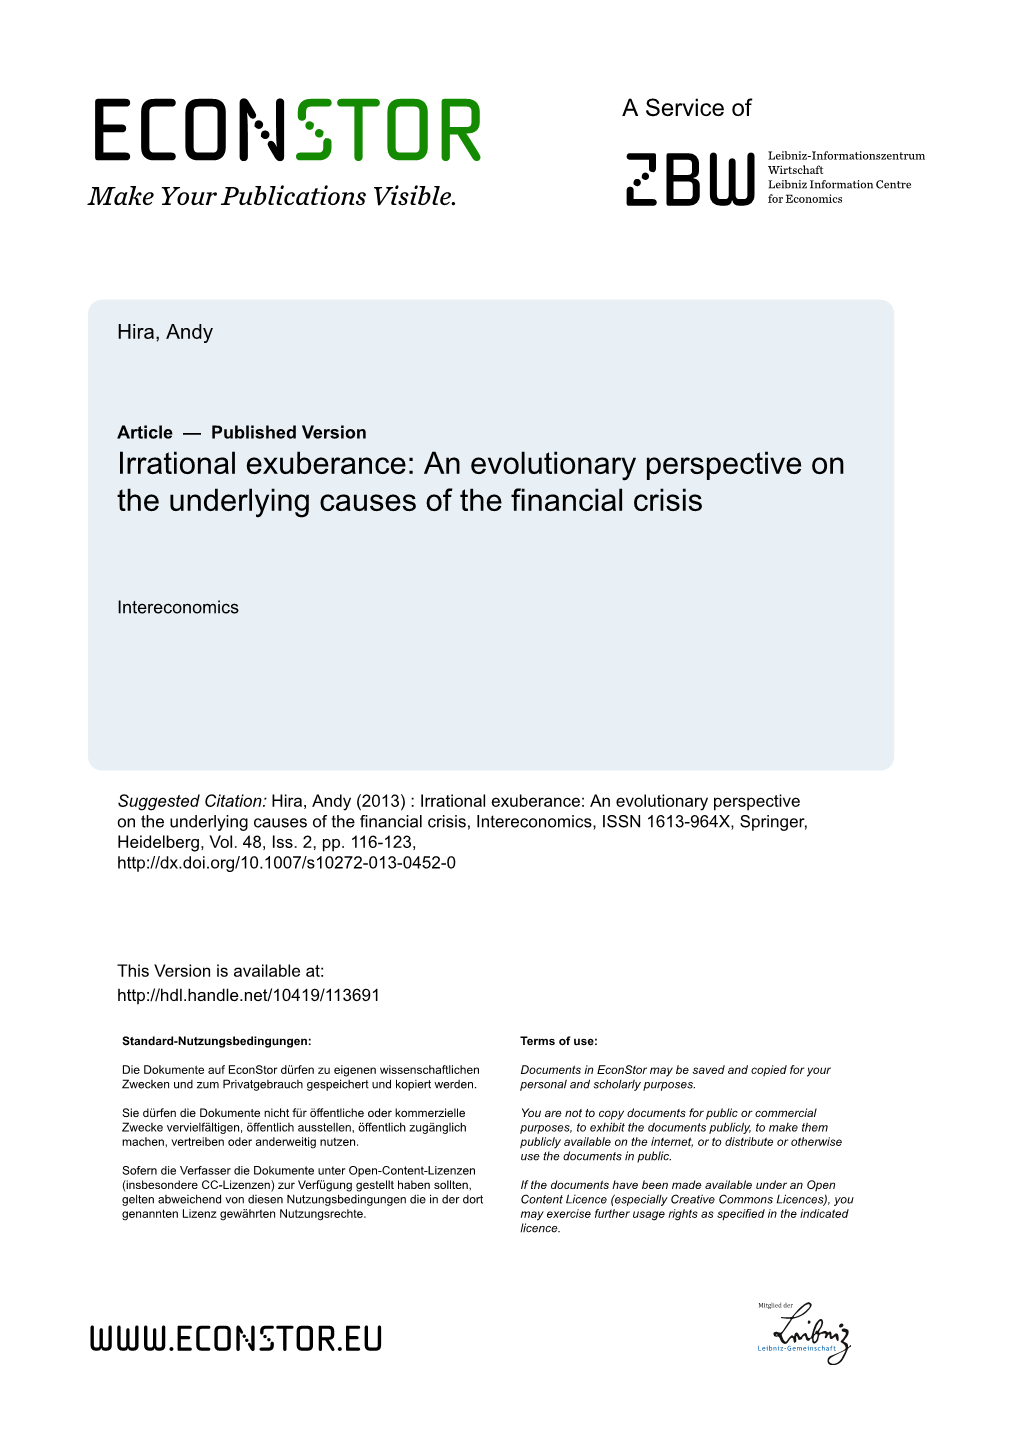 Irrational Exuberance: an Evolutionary Perspective on the Underlying Causes of the Financial Crisis